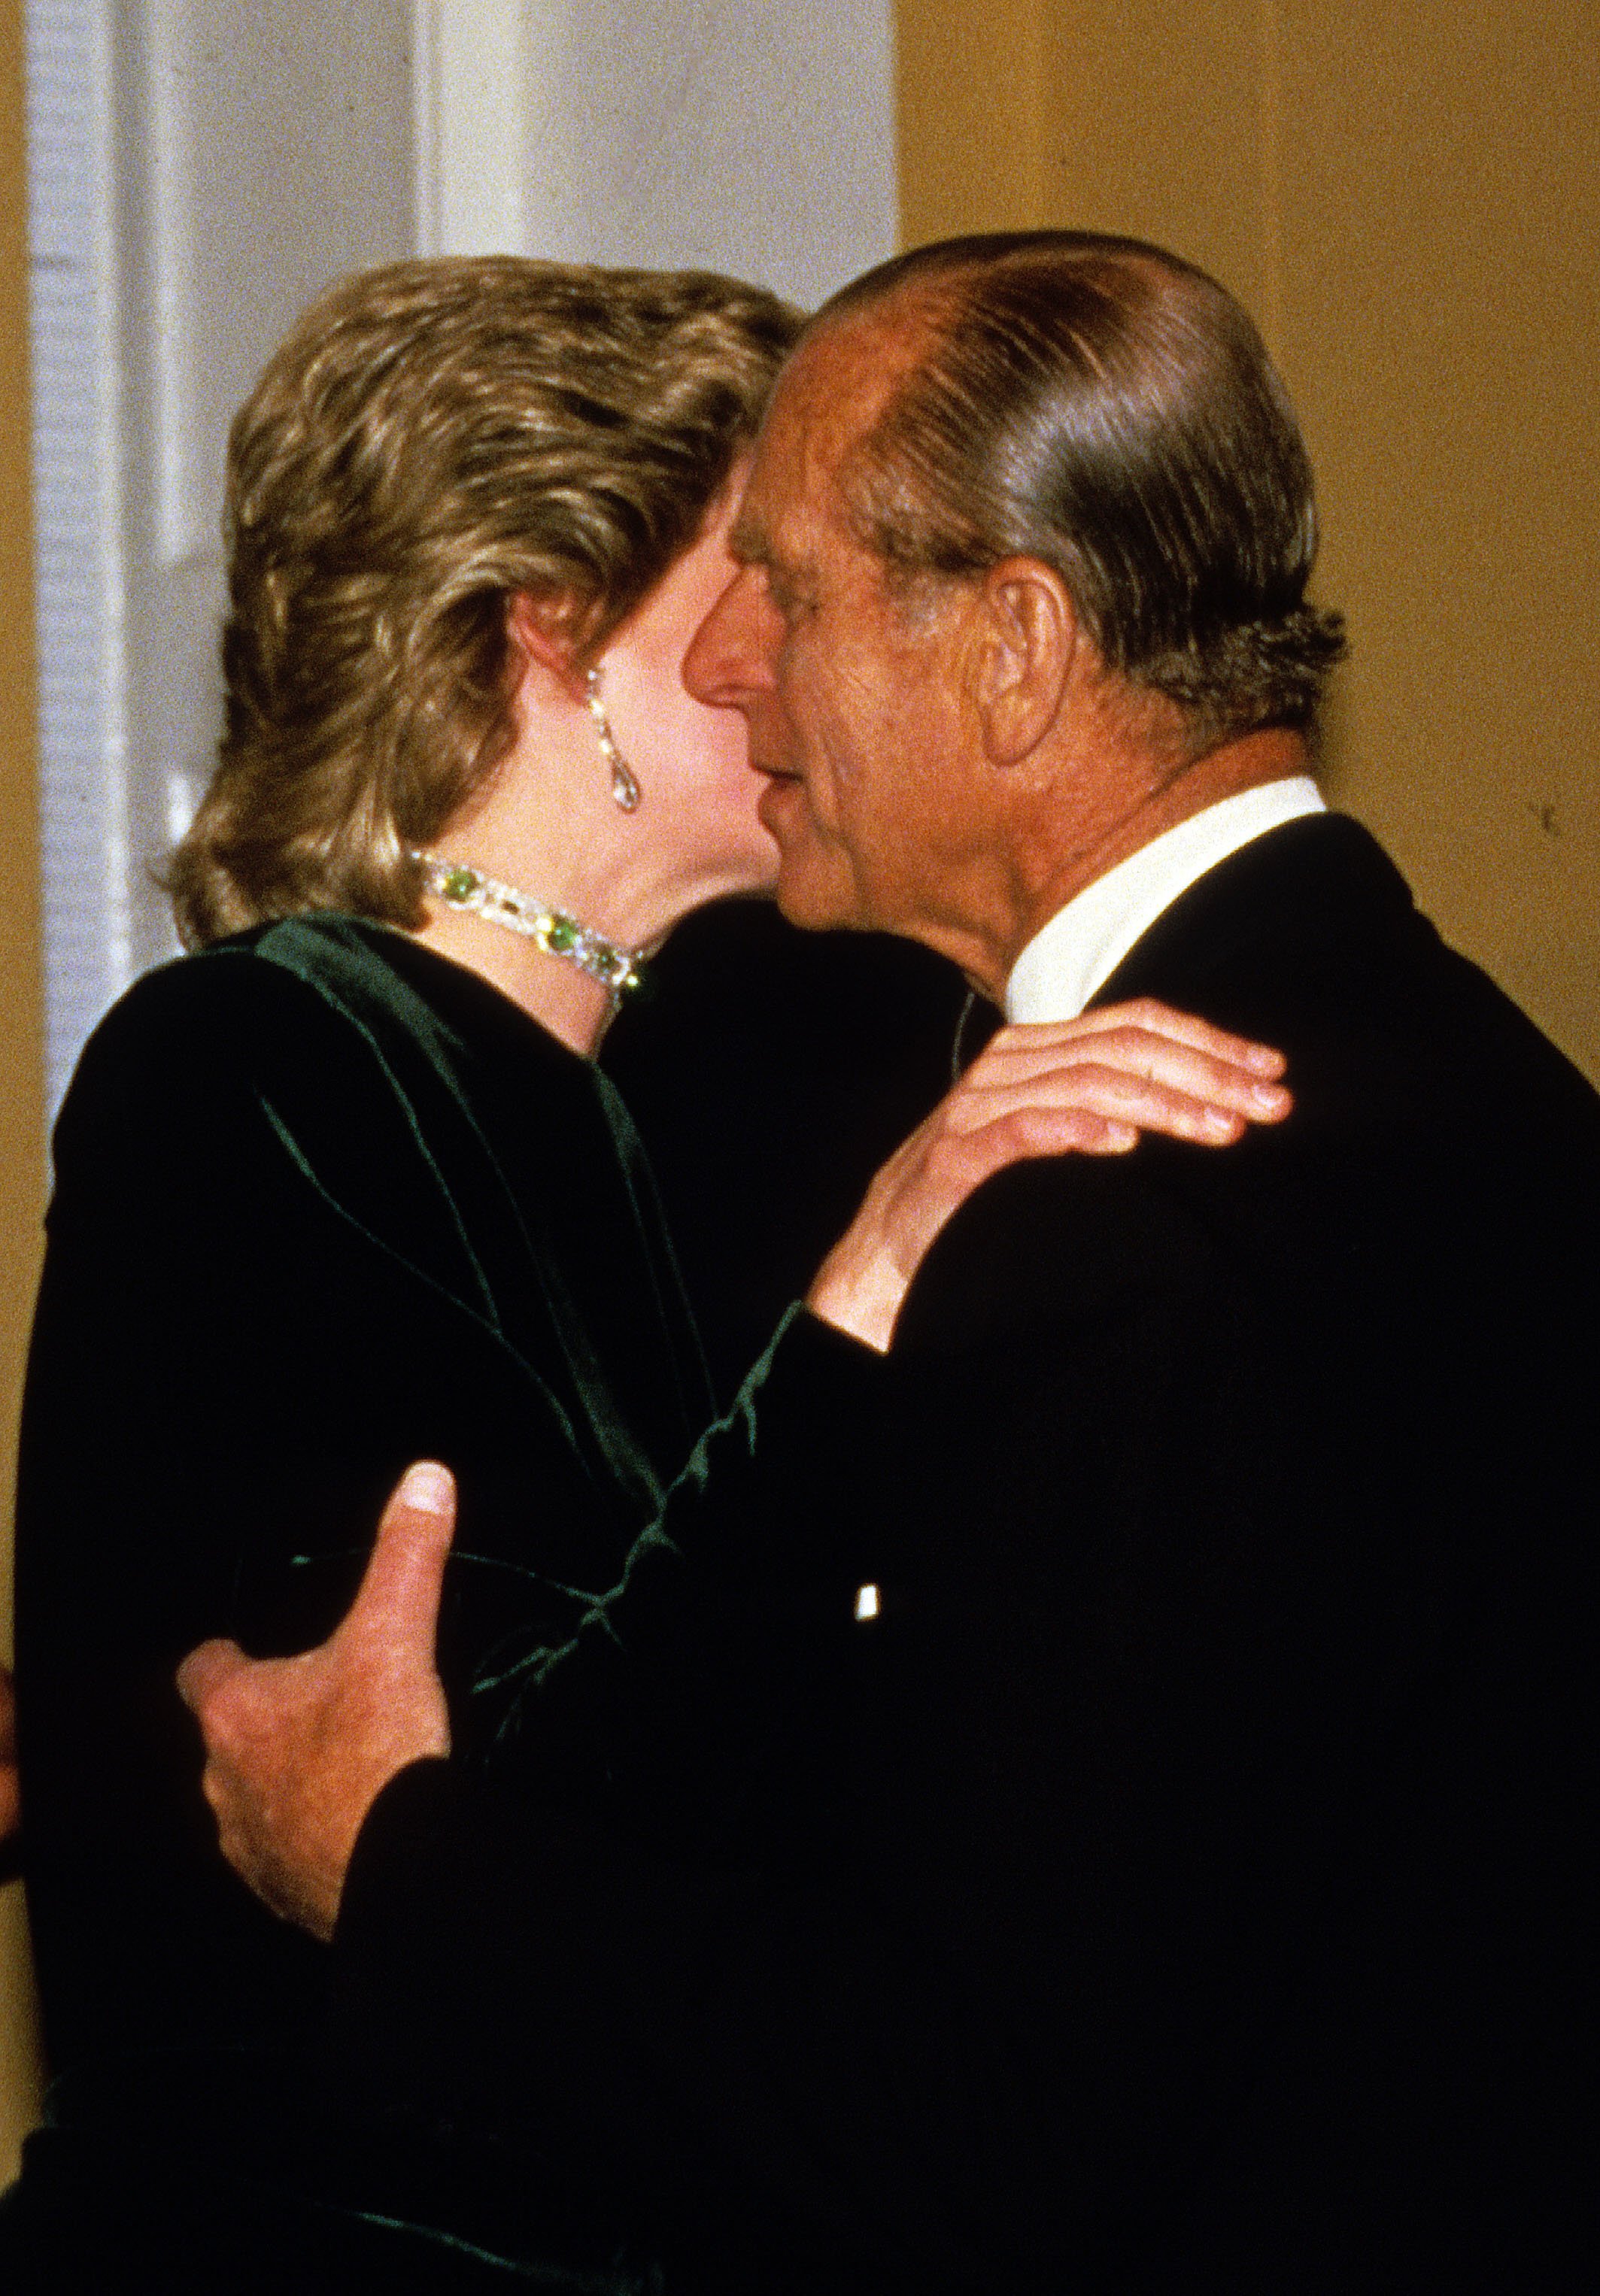  Prince Philip, Duke of Edinburgh receives a kiss from Diana, Princess of Wales in London | Photo: Getty Images